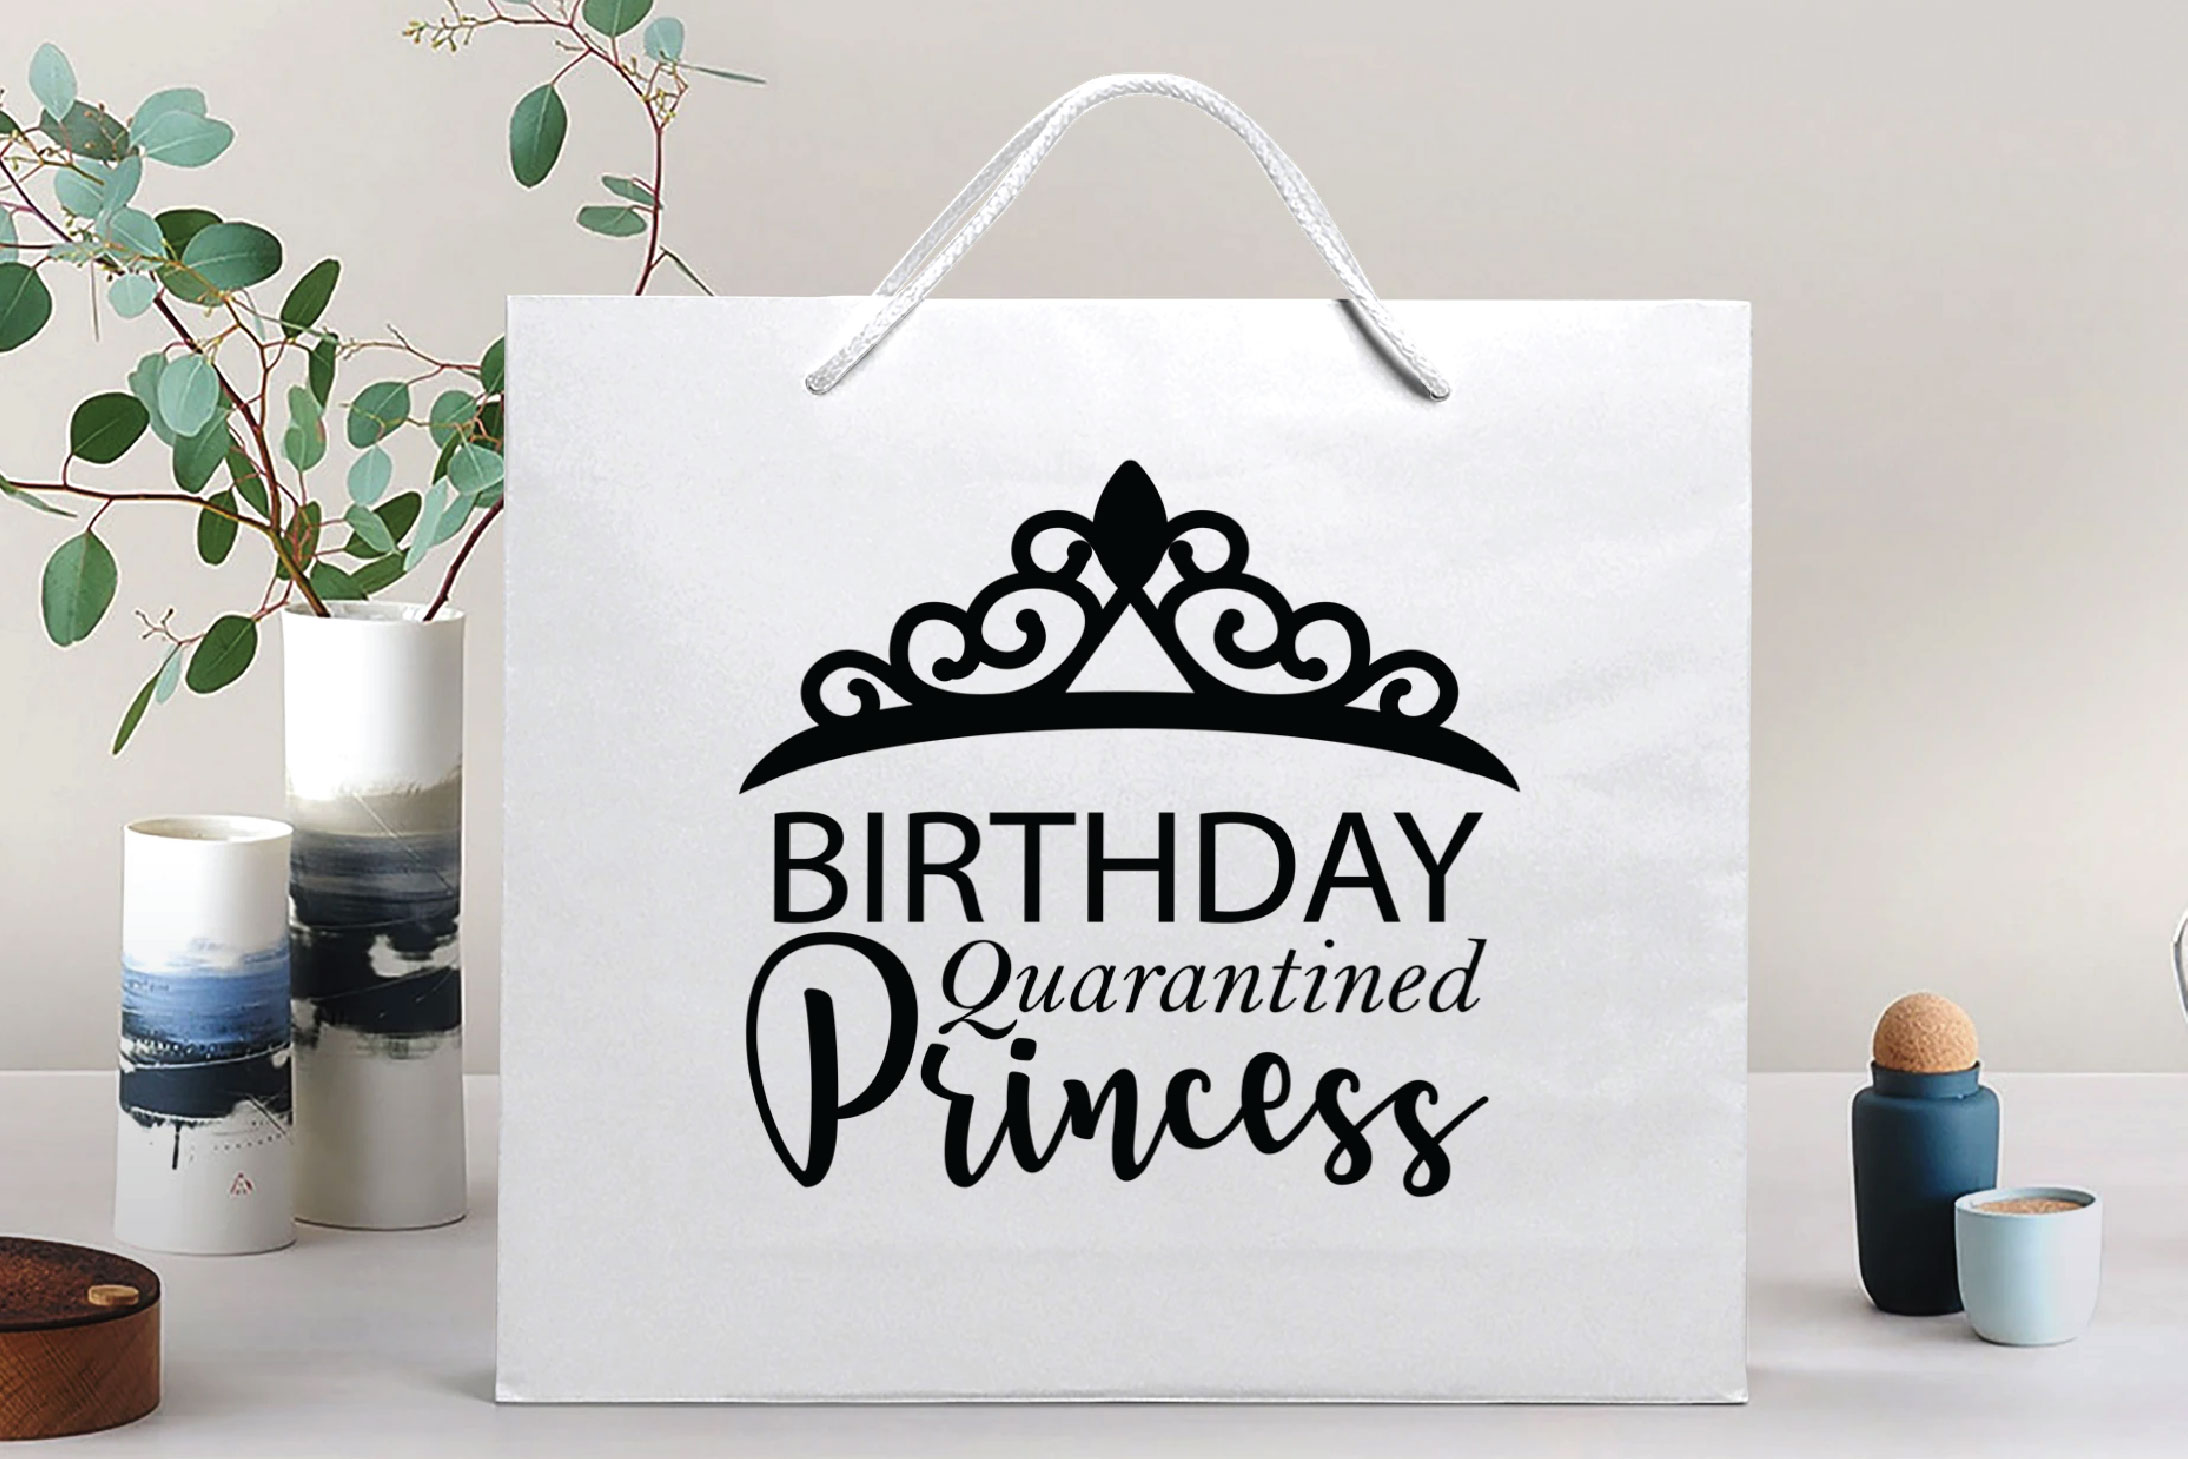 Download Quarantined Birthday Princess gift and decor cutting file.